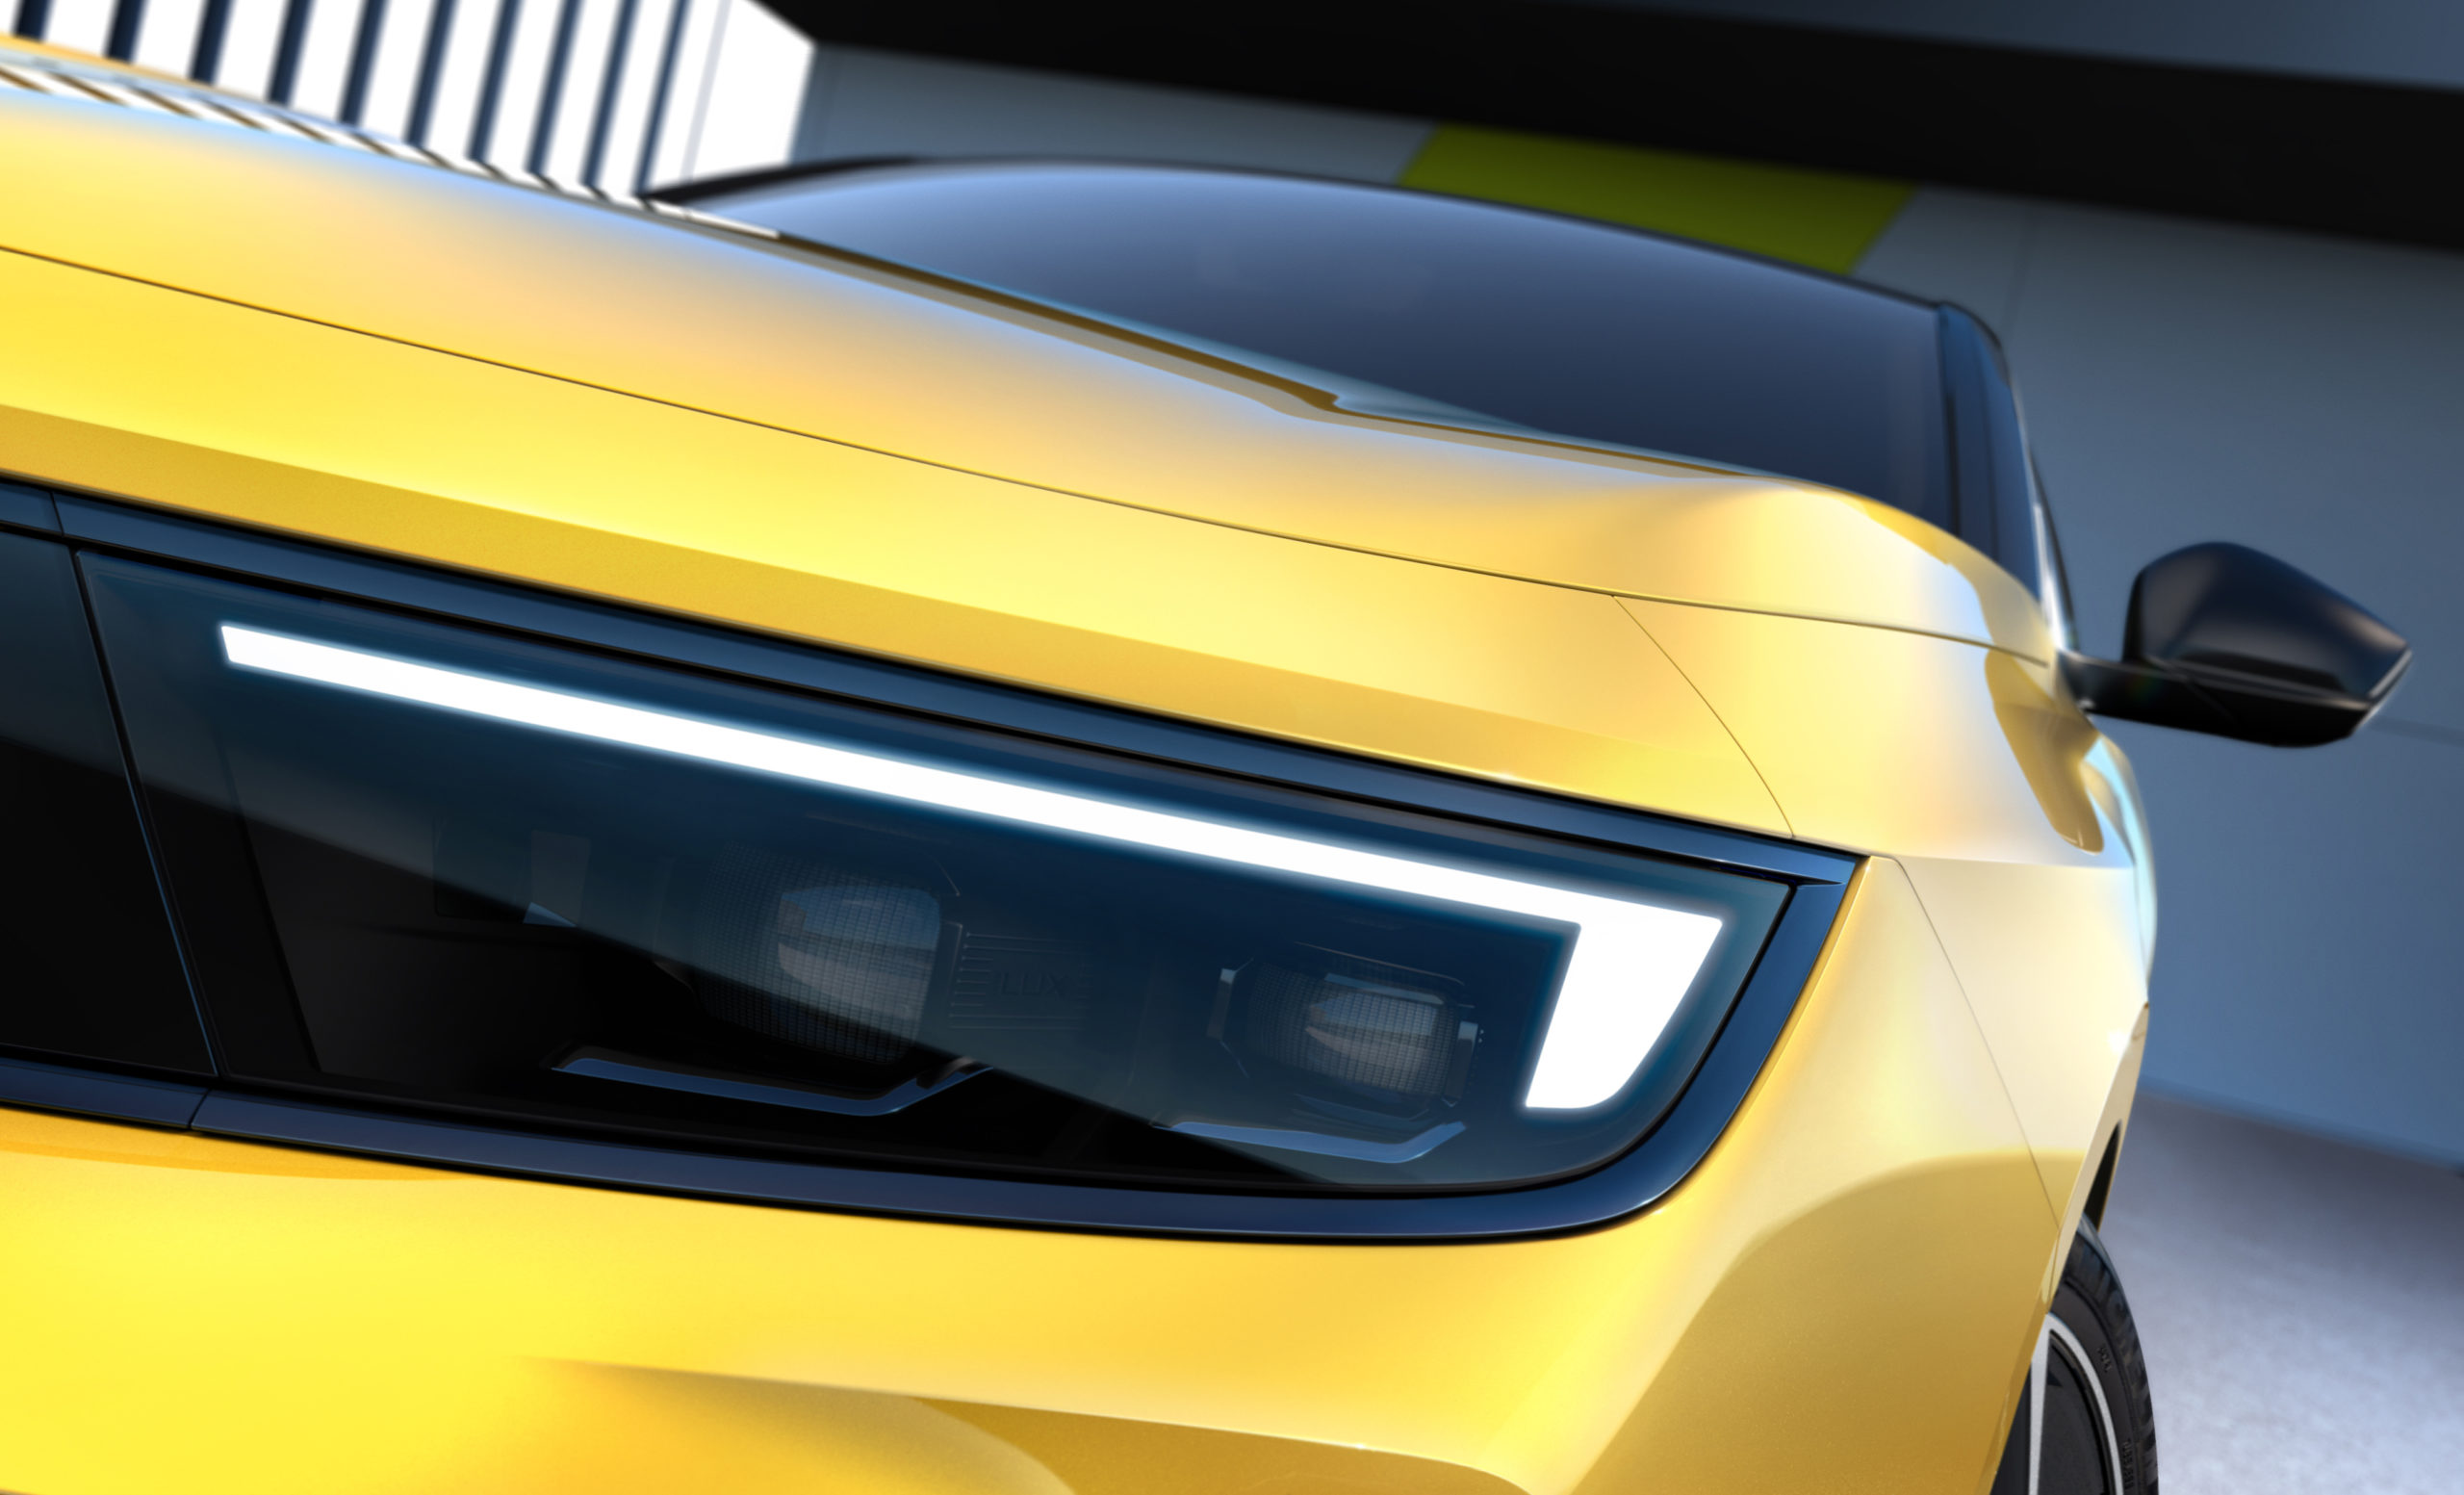 First glimpse at the next generation electric Astra